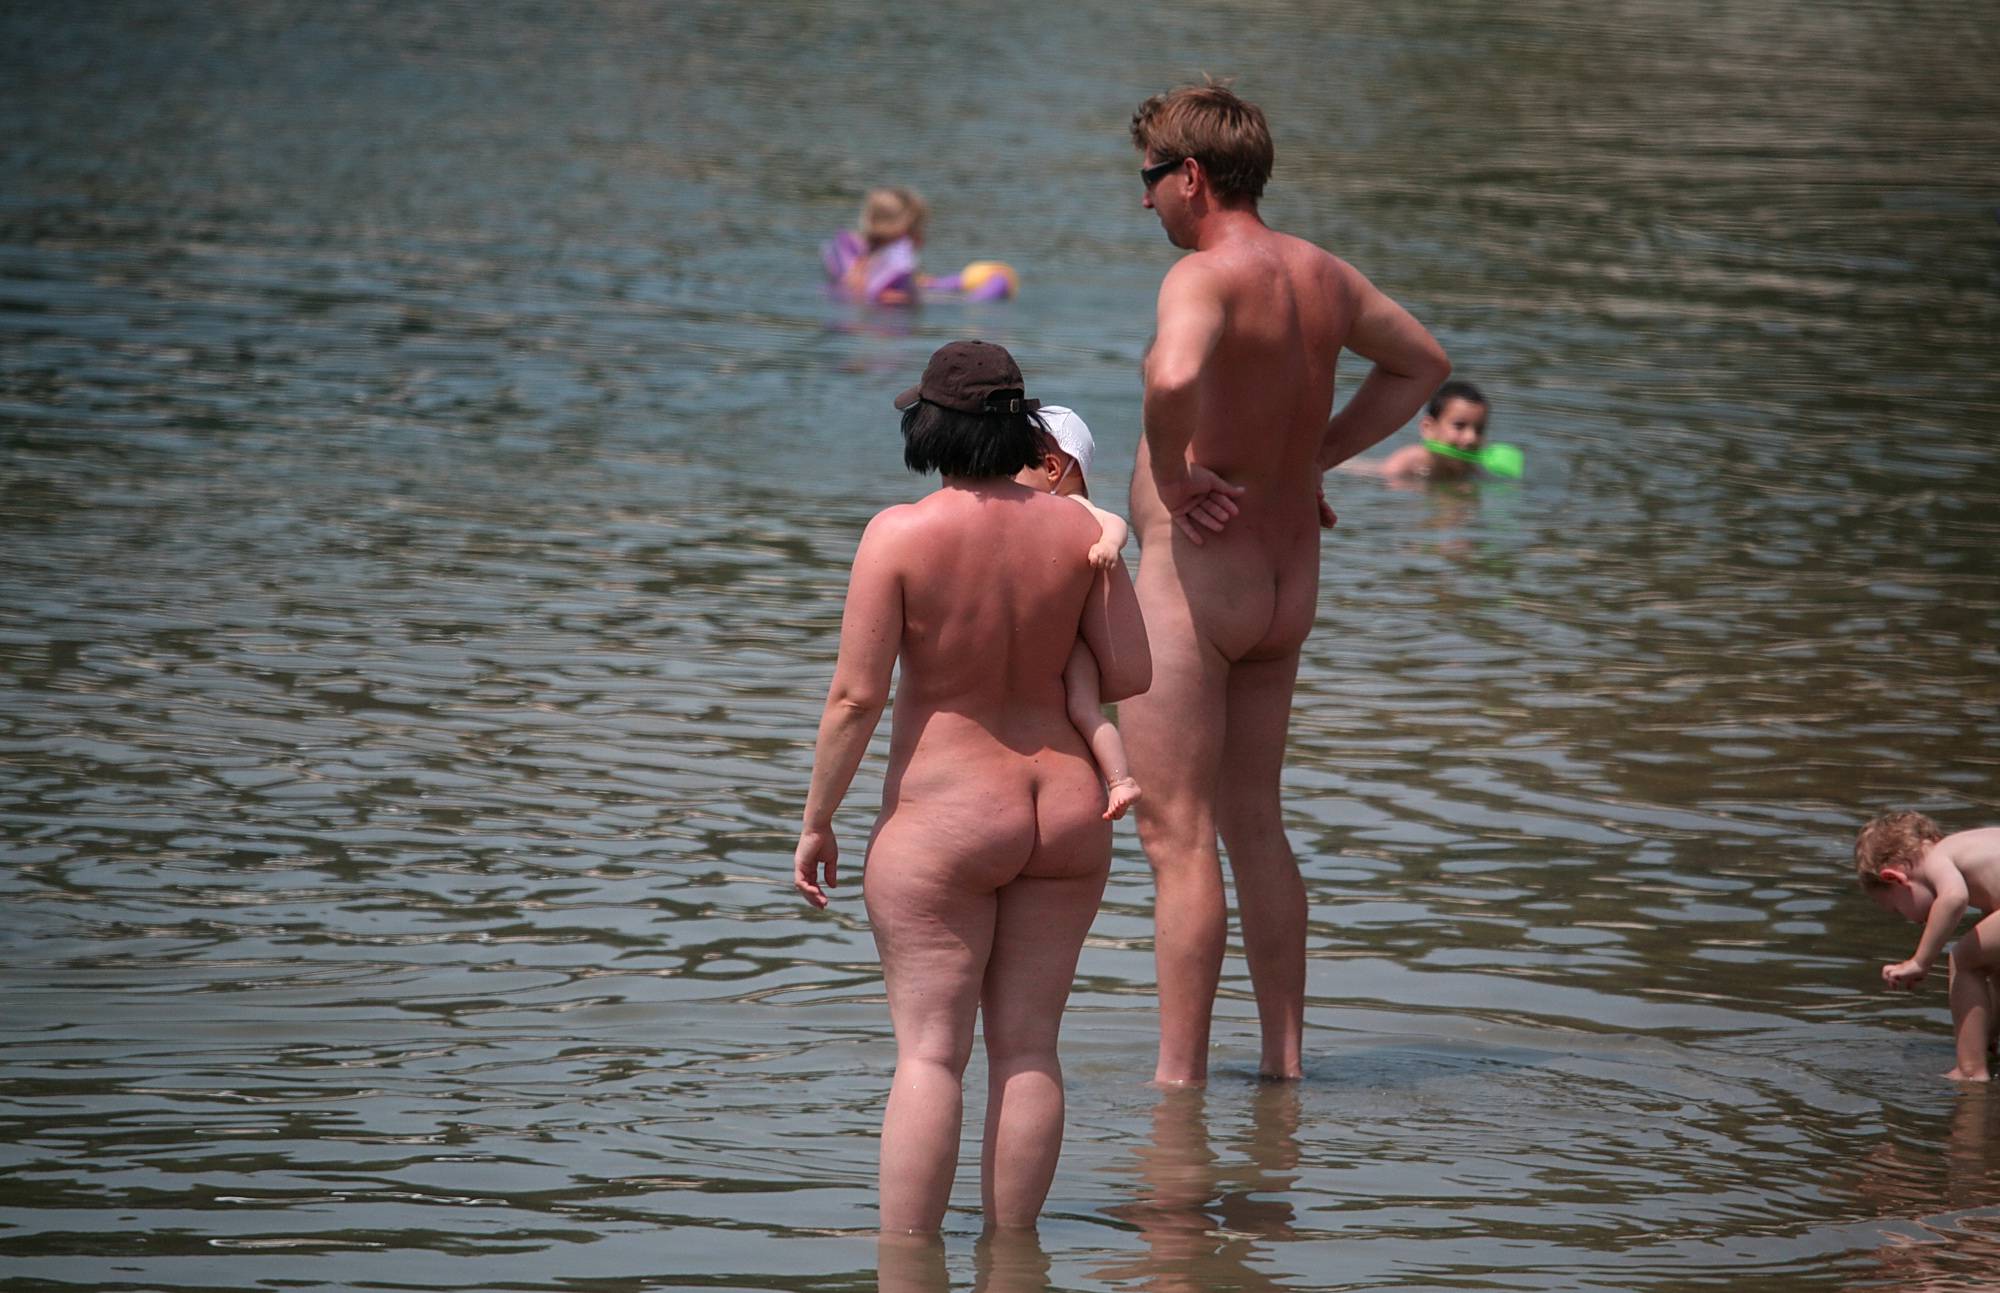 Pure Nudism-Shallow Water Play Time - 1